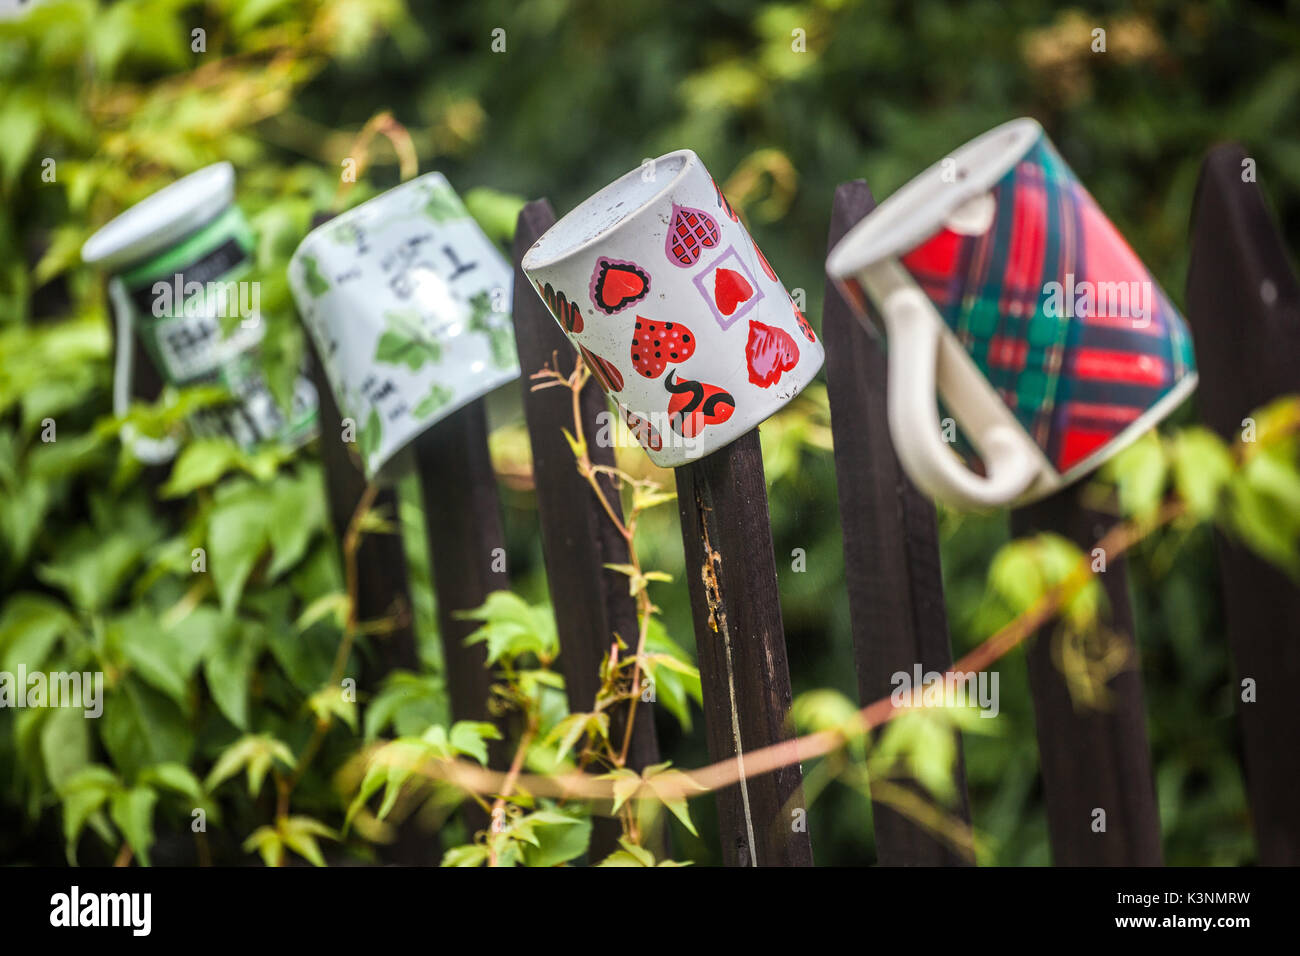 Ceramic cups hanging on the wooden garden fence, a mug with hearts, and still life Czech Republic Stock Photo